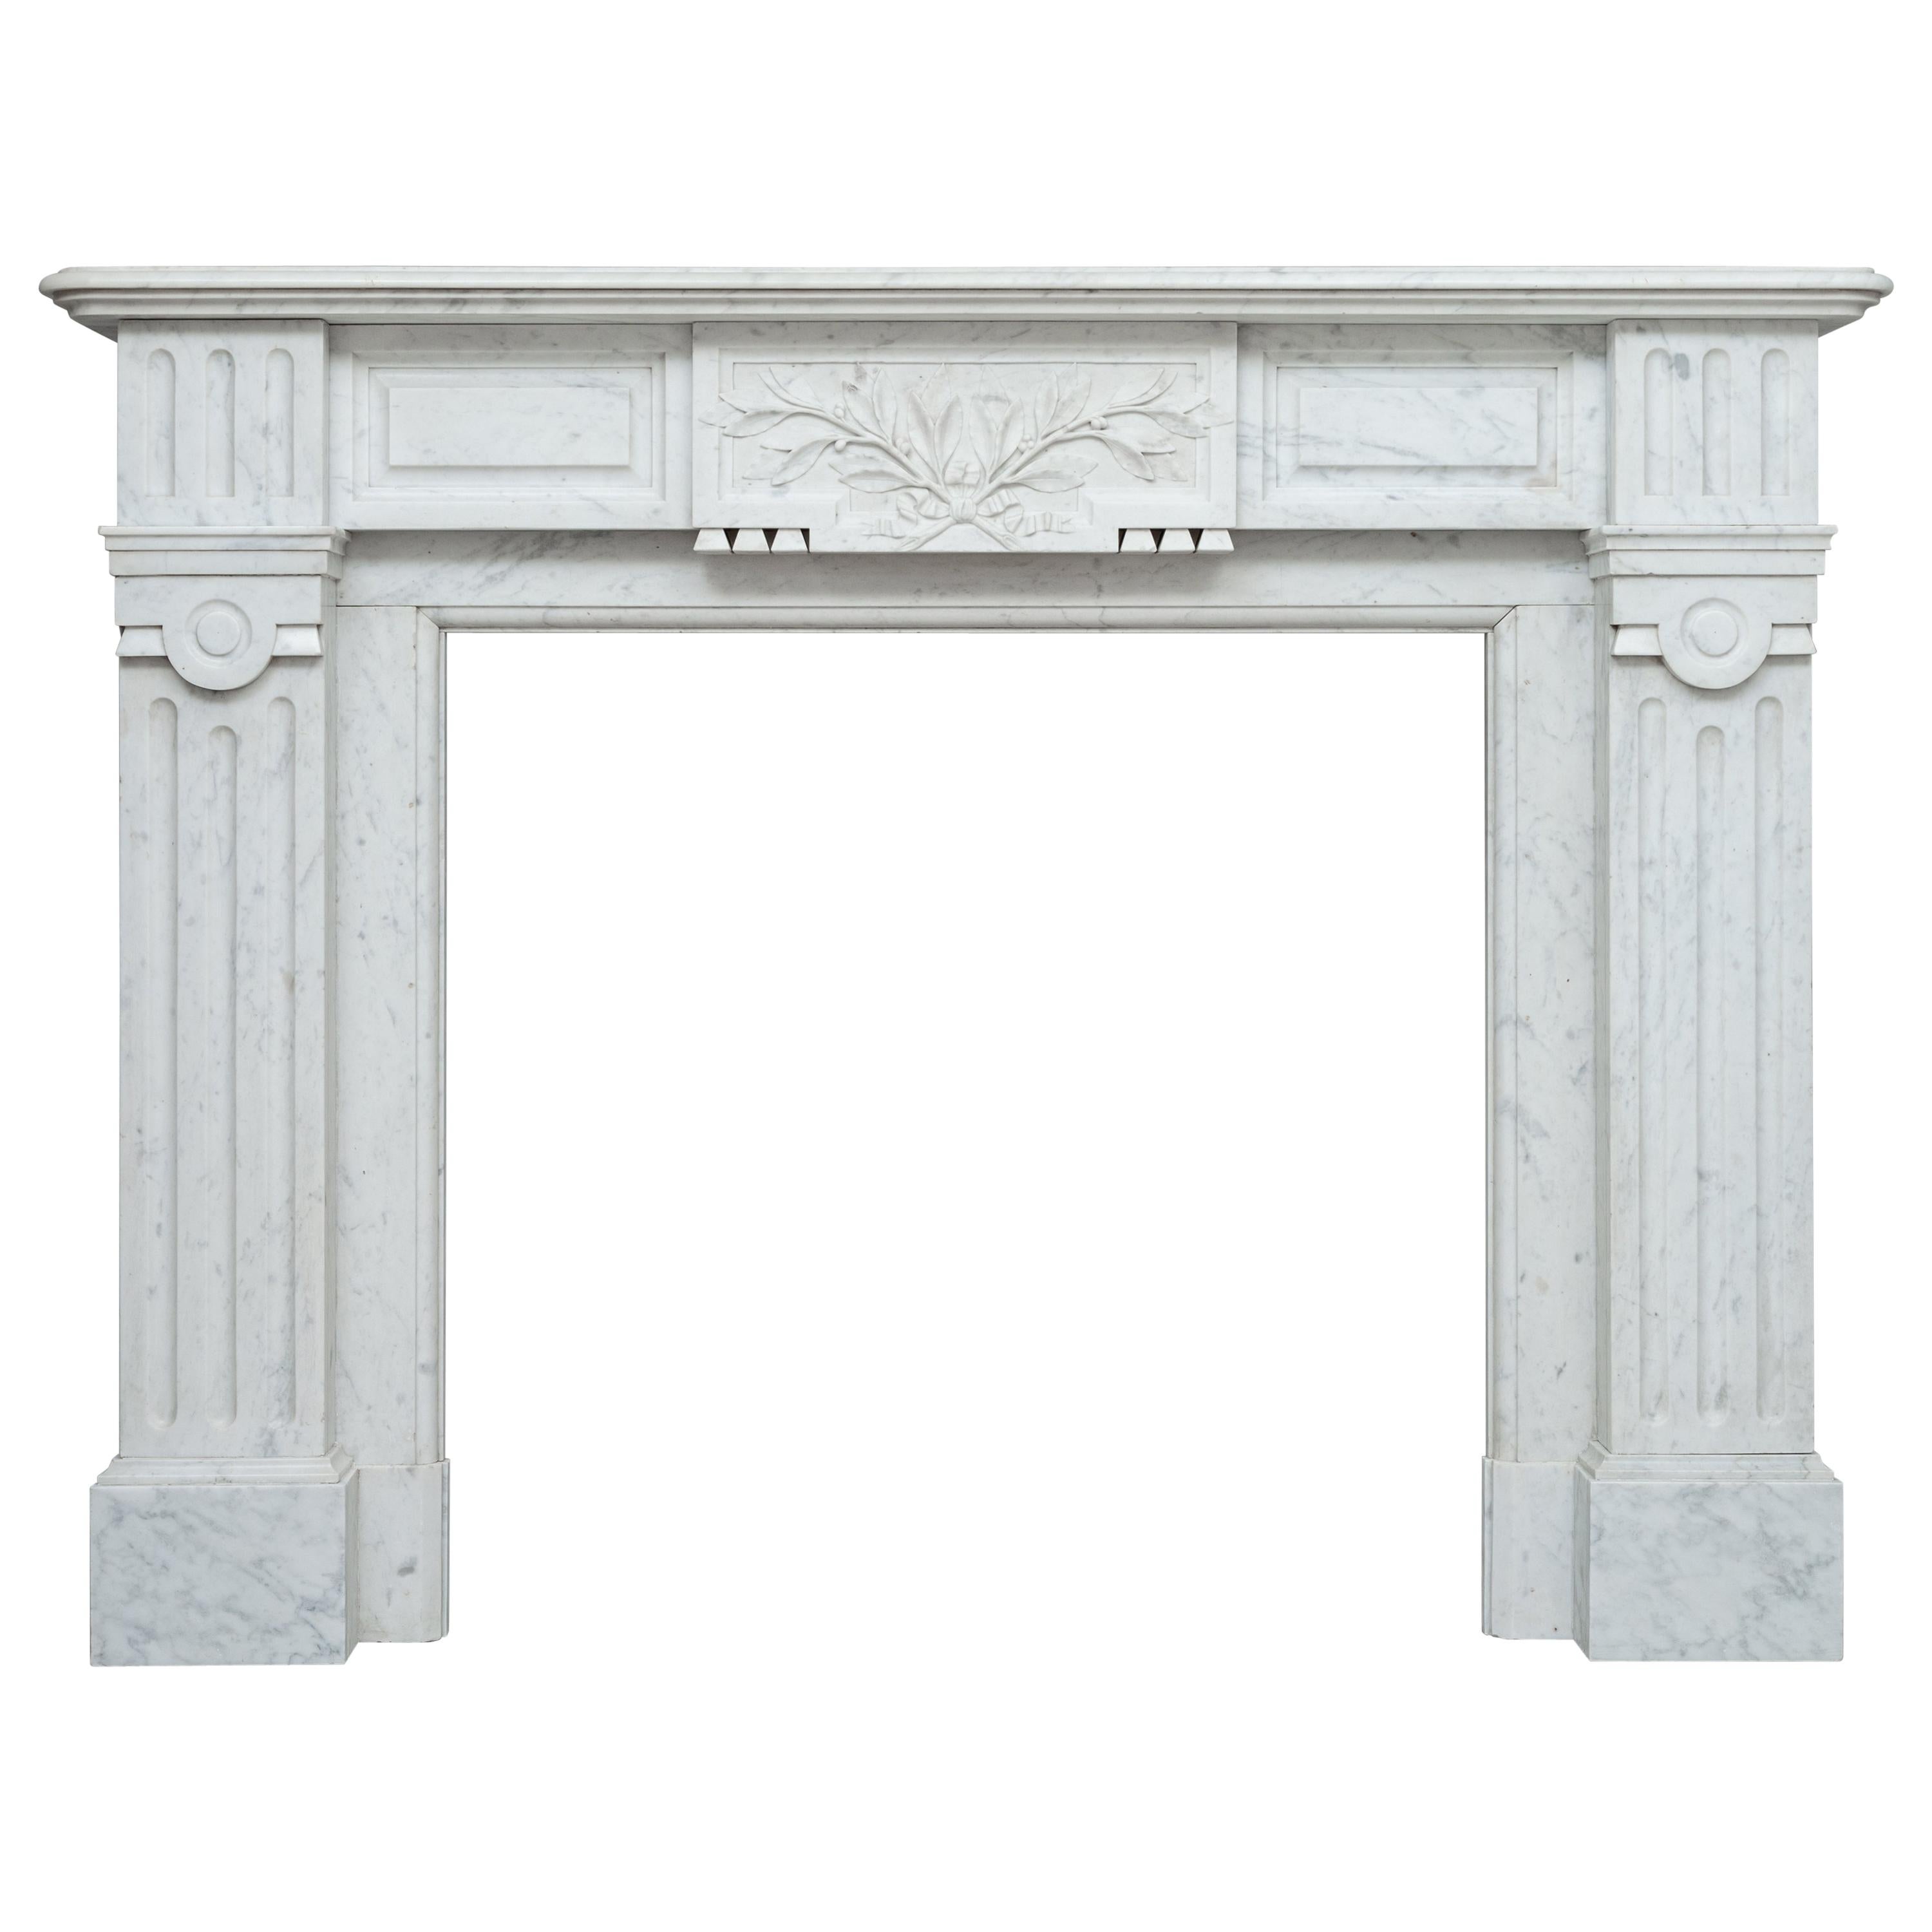 Neoclassic French White Carrara Marble Antique Fireplace For Sale